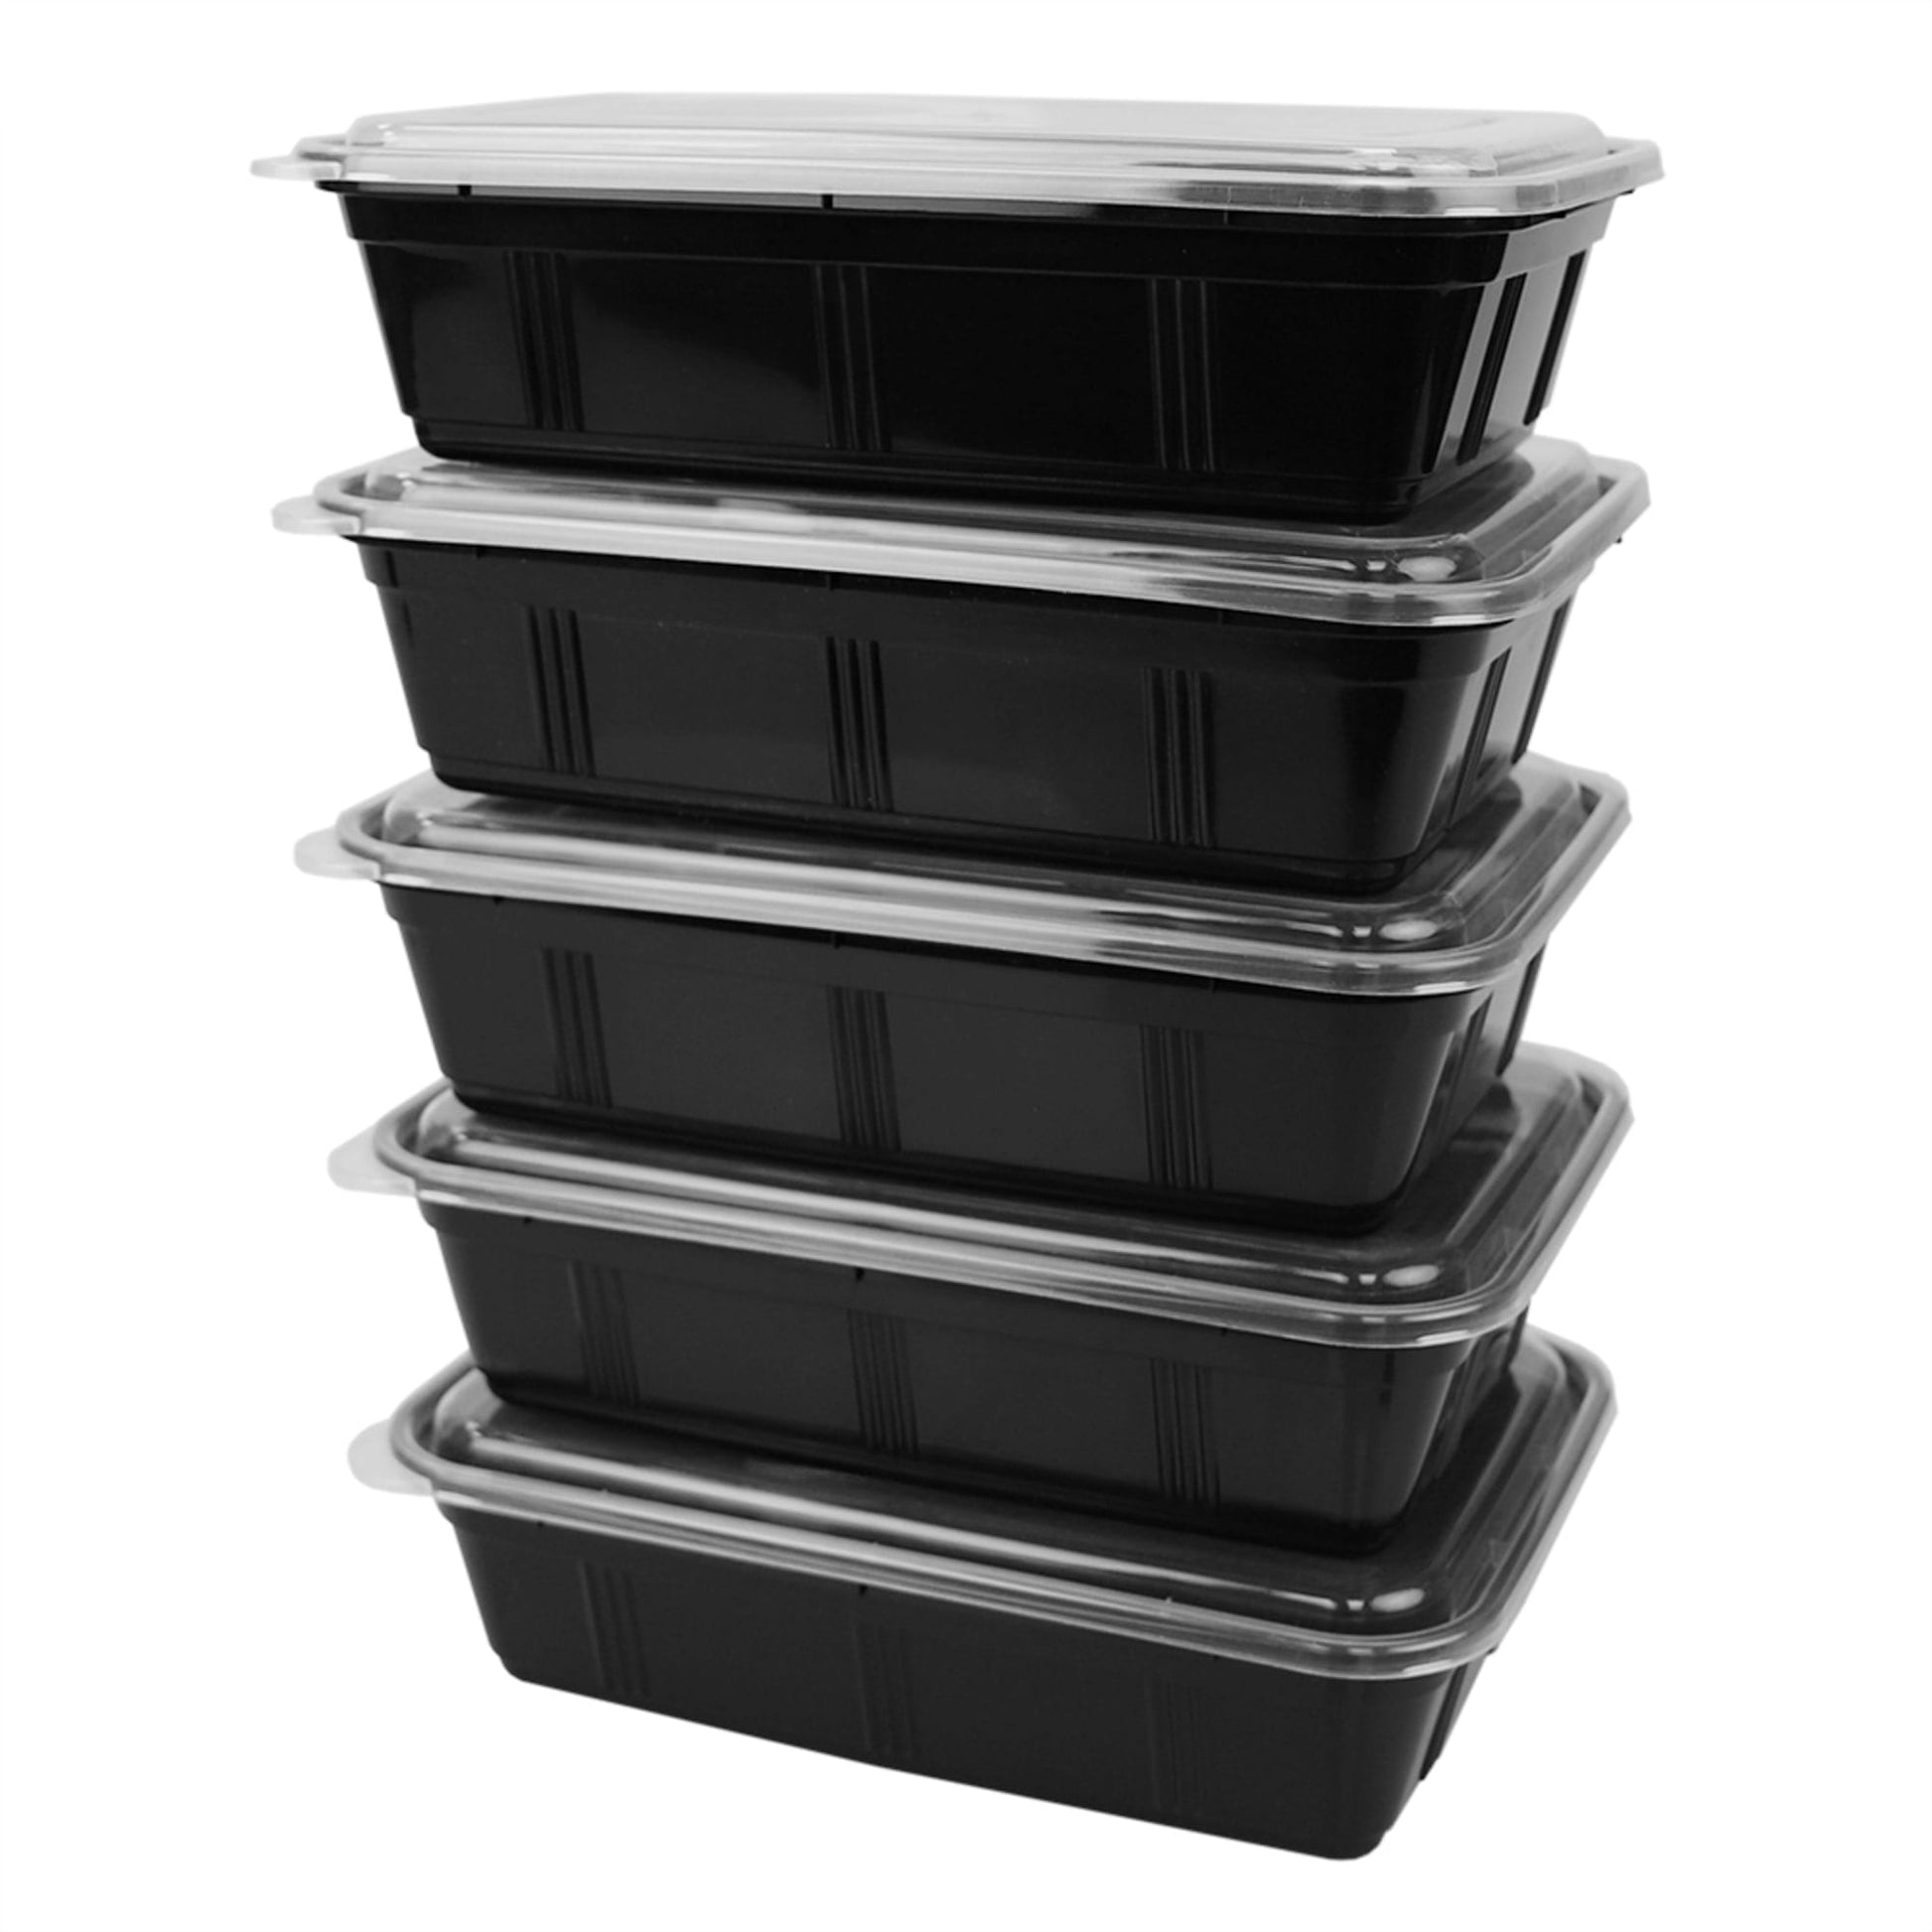 12 pieces Home Basic 10 Piece 3 Compartment BpA-Free Plastic Meal Prep  Containers, Black - Food Storage Containers